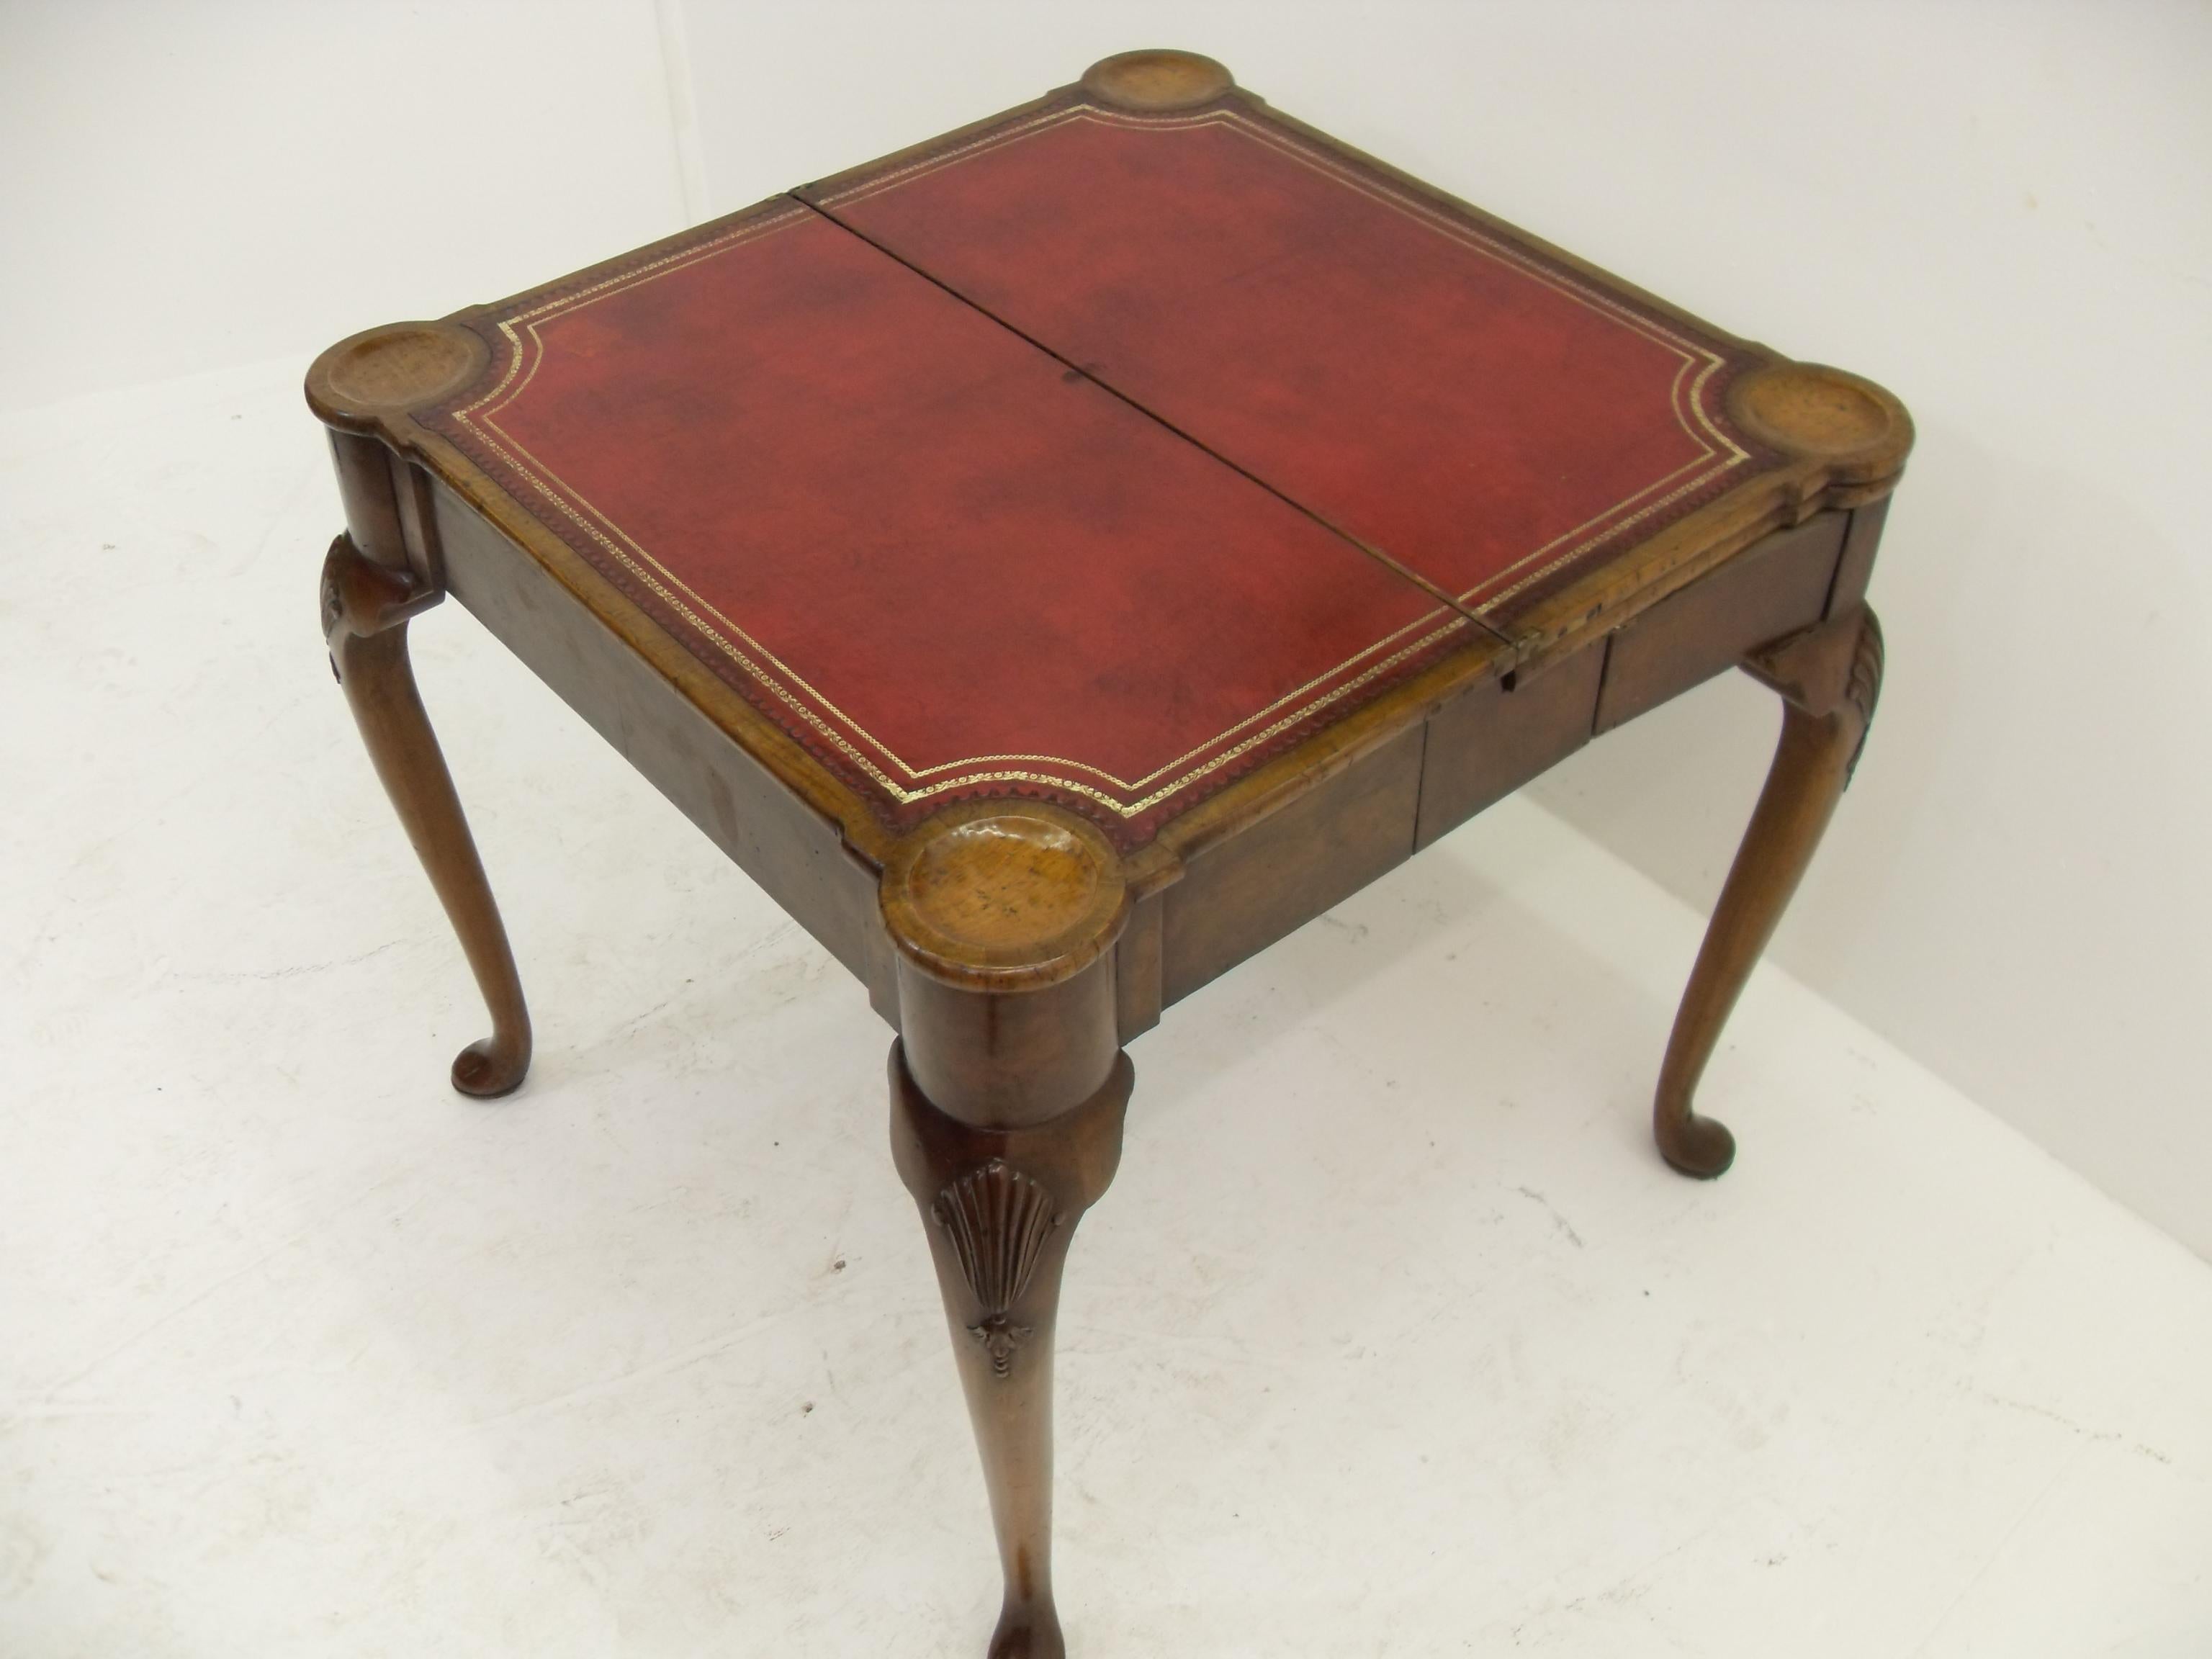 A triple layer George II style mahogany card or tea table, with a concertina action to the legs. The top unfolding to reveal a tea table with polished walnut top, opening again to reveal a card table with carved guinea wells and a gilt leather